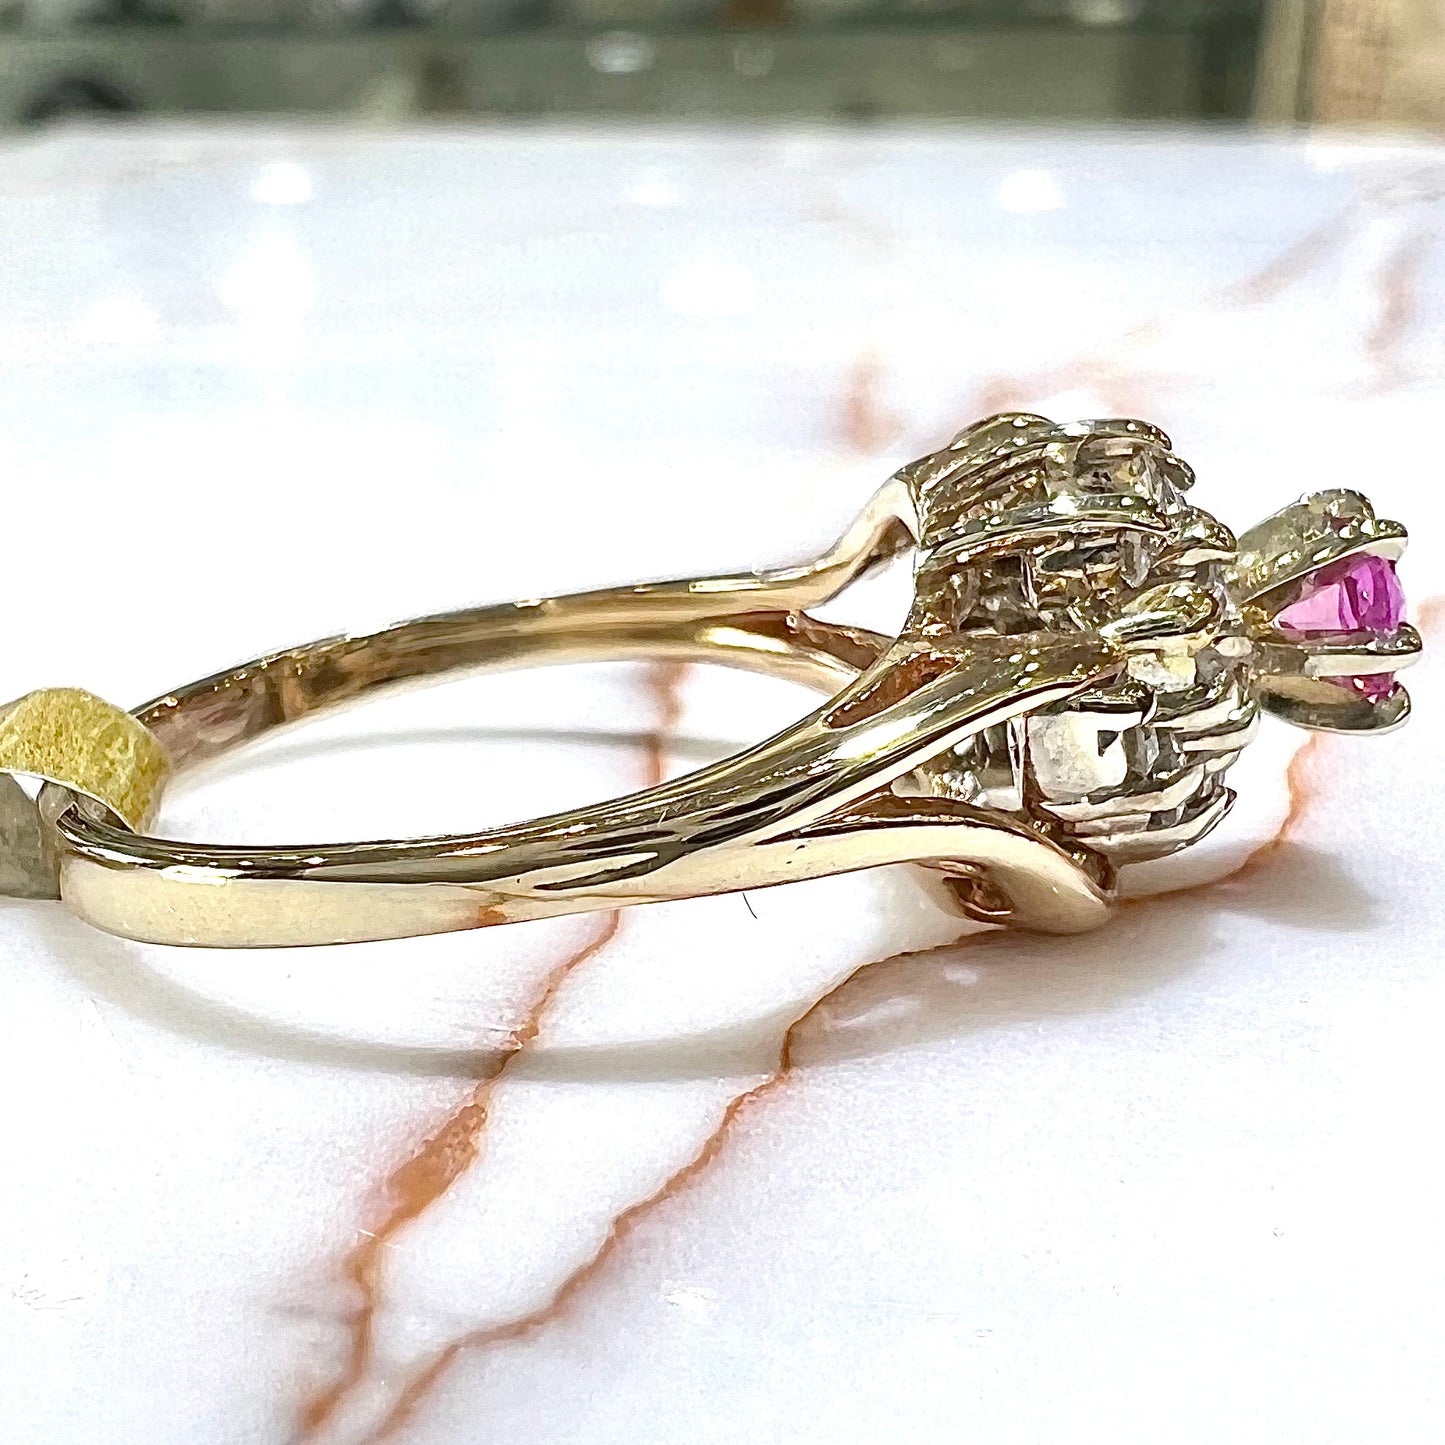 A round pink sapphire high-set in a yellow gold diamond cluster ring.